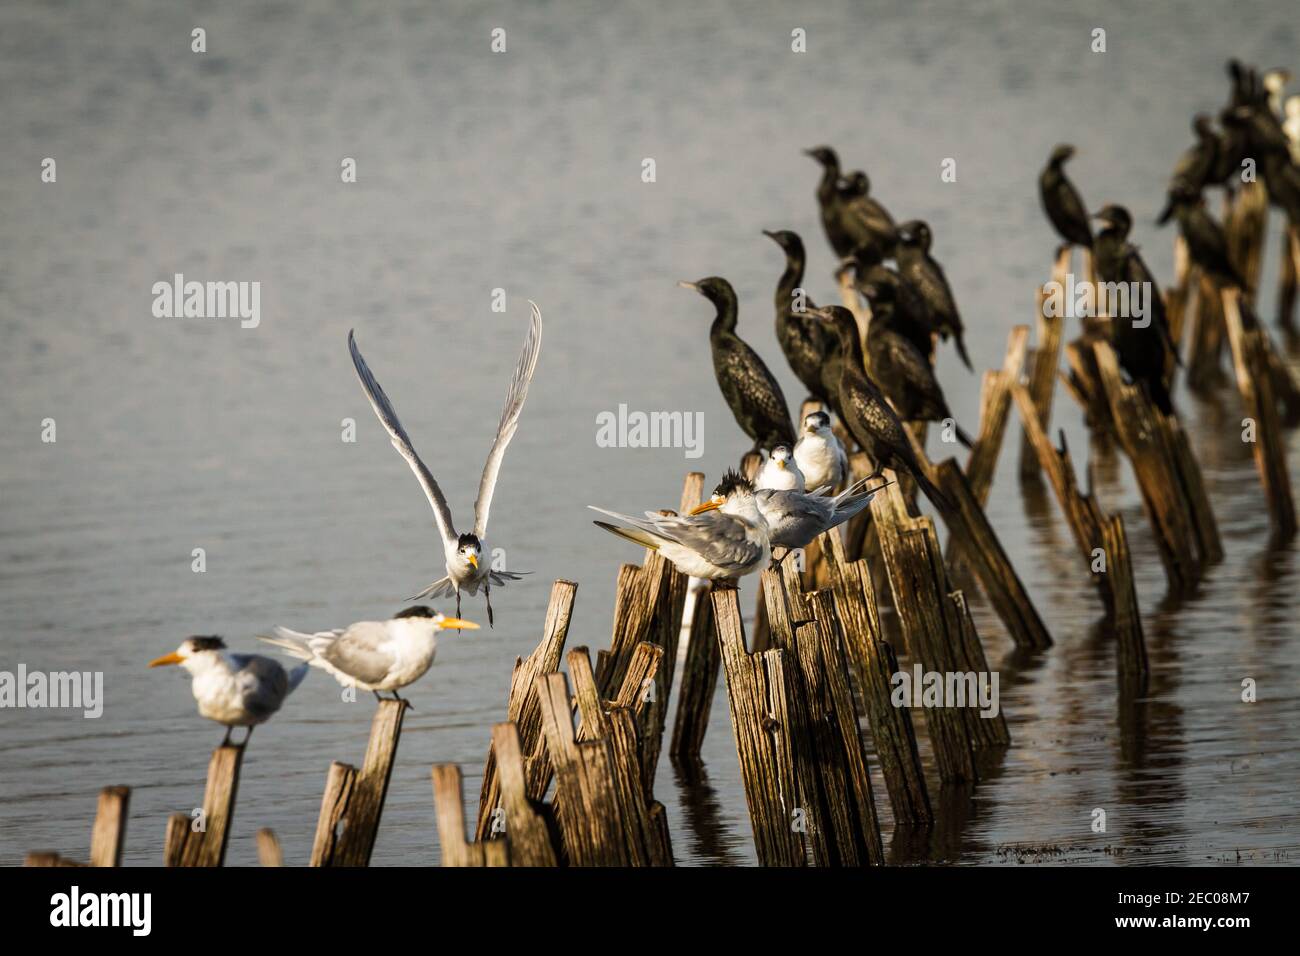 Crested Tern coming into land on old wooden jetty pylons. Belvidere Bunbury Western Australia Stock Photo